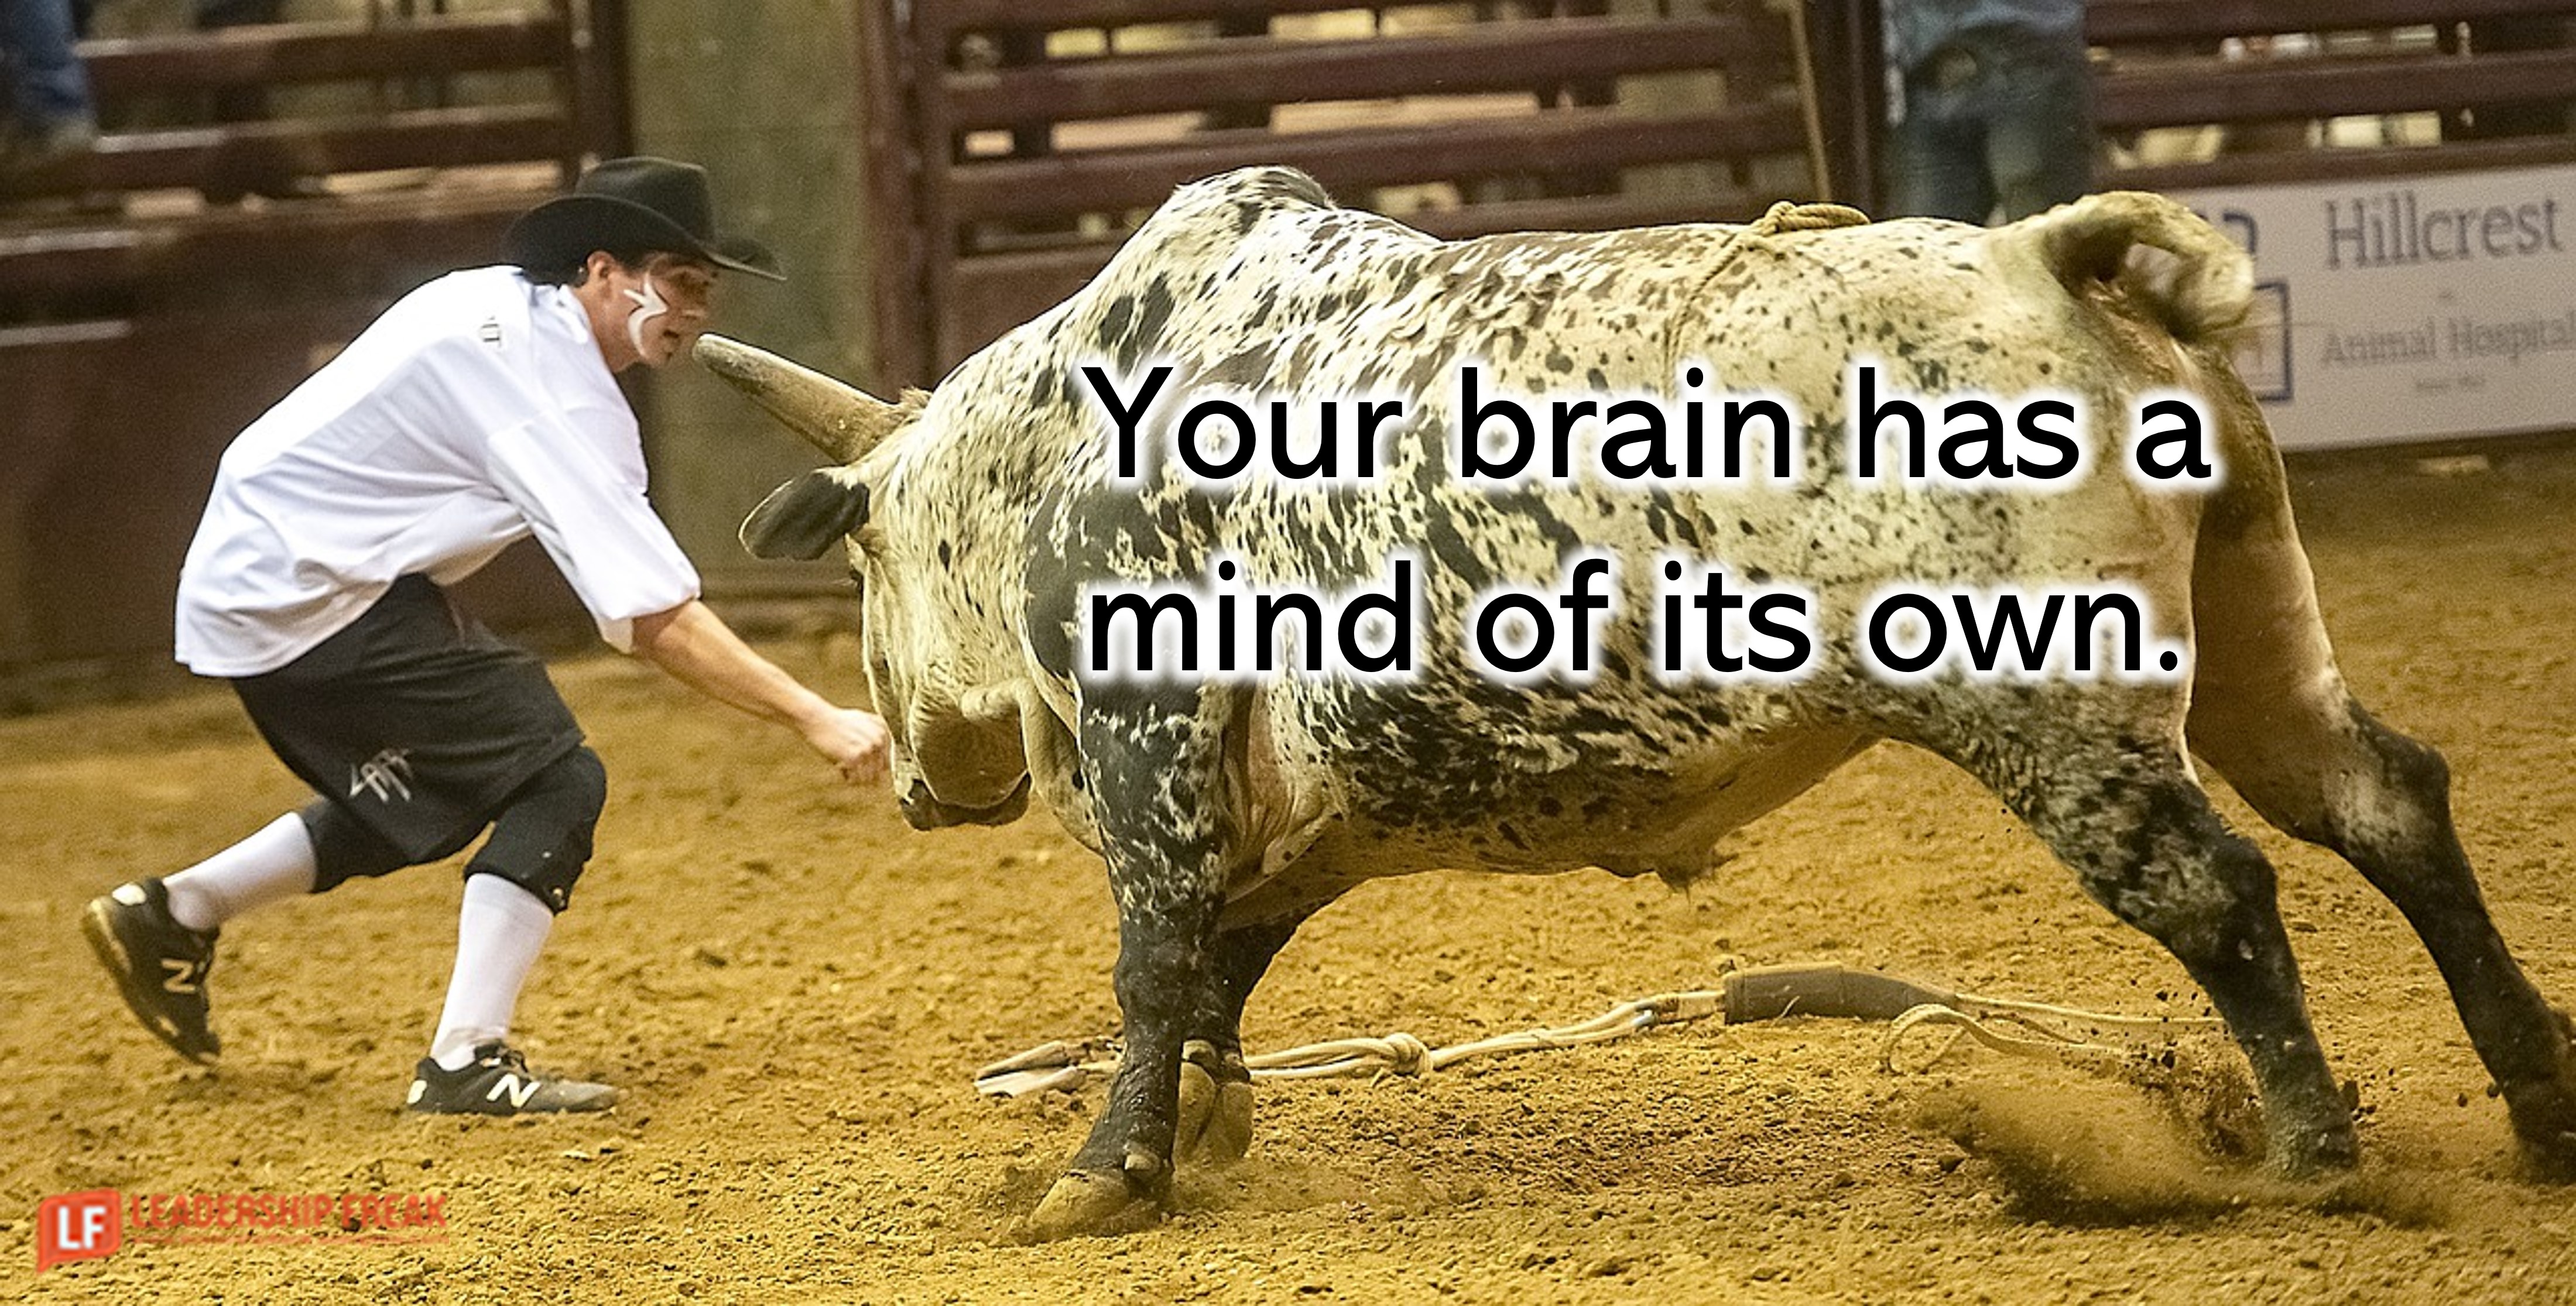 Image of a bull facing down a rodeo clown.

Your brain has a mind of its own.